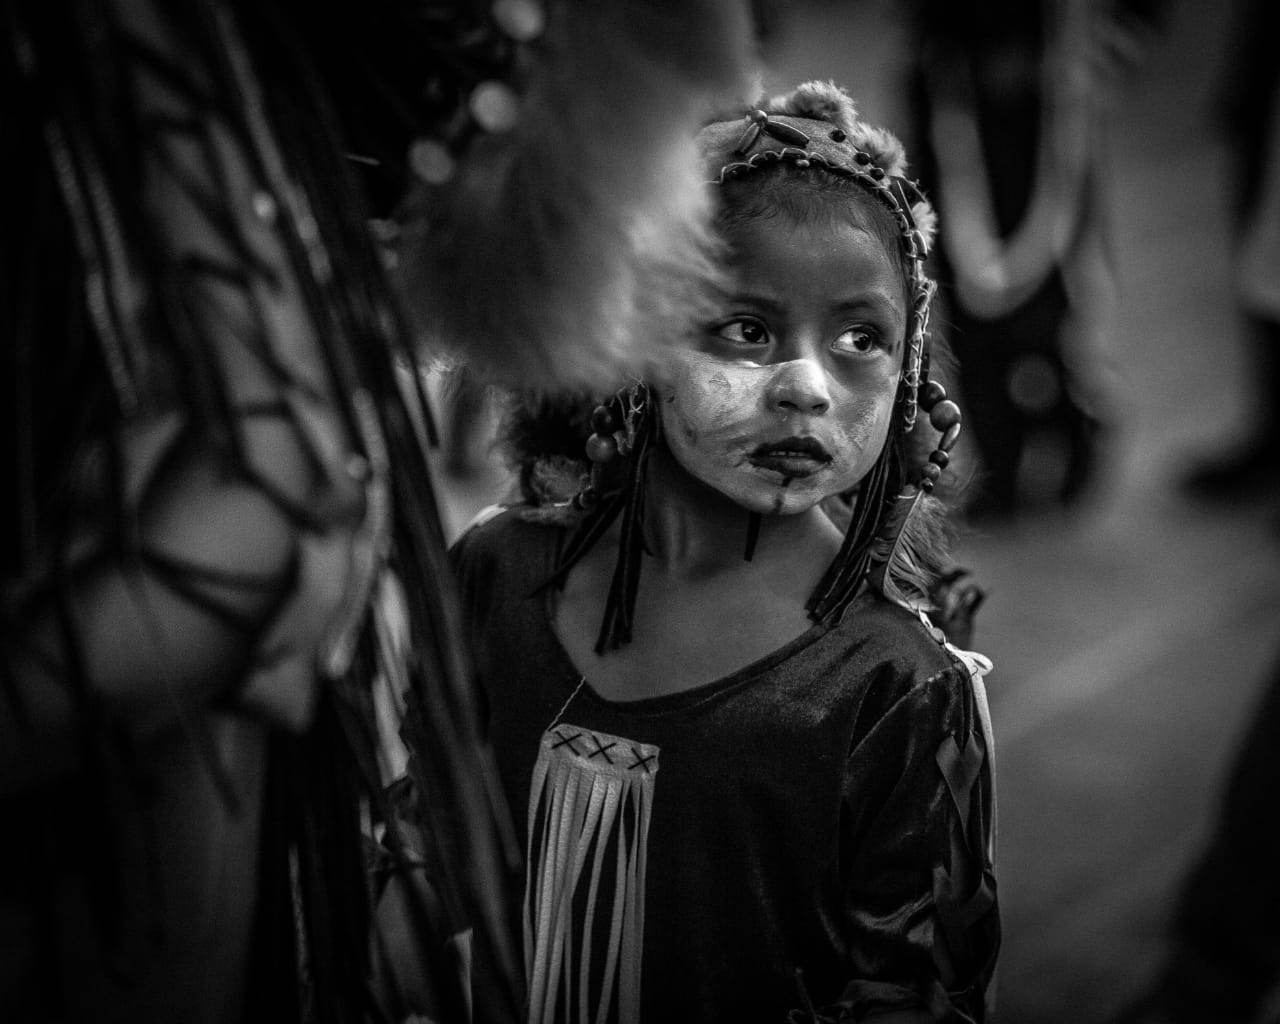 By the stare of the younglings, you can imagine how impressive the scene is. Like this little girl, staring at the hordes of Concheros who are screaming out loud and dancing to the rhythm of the drums.  